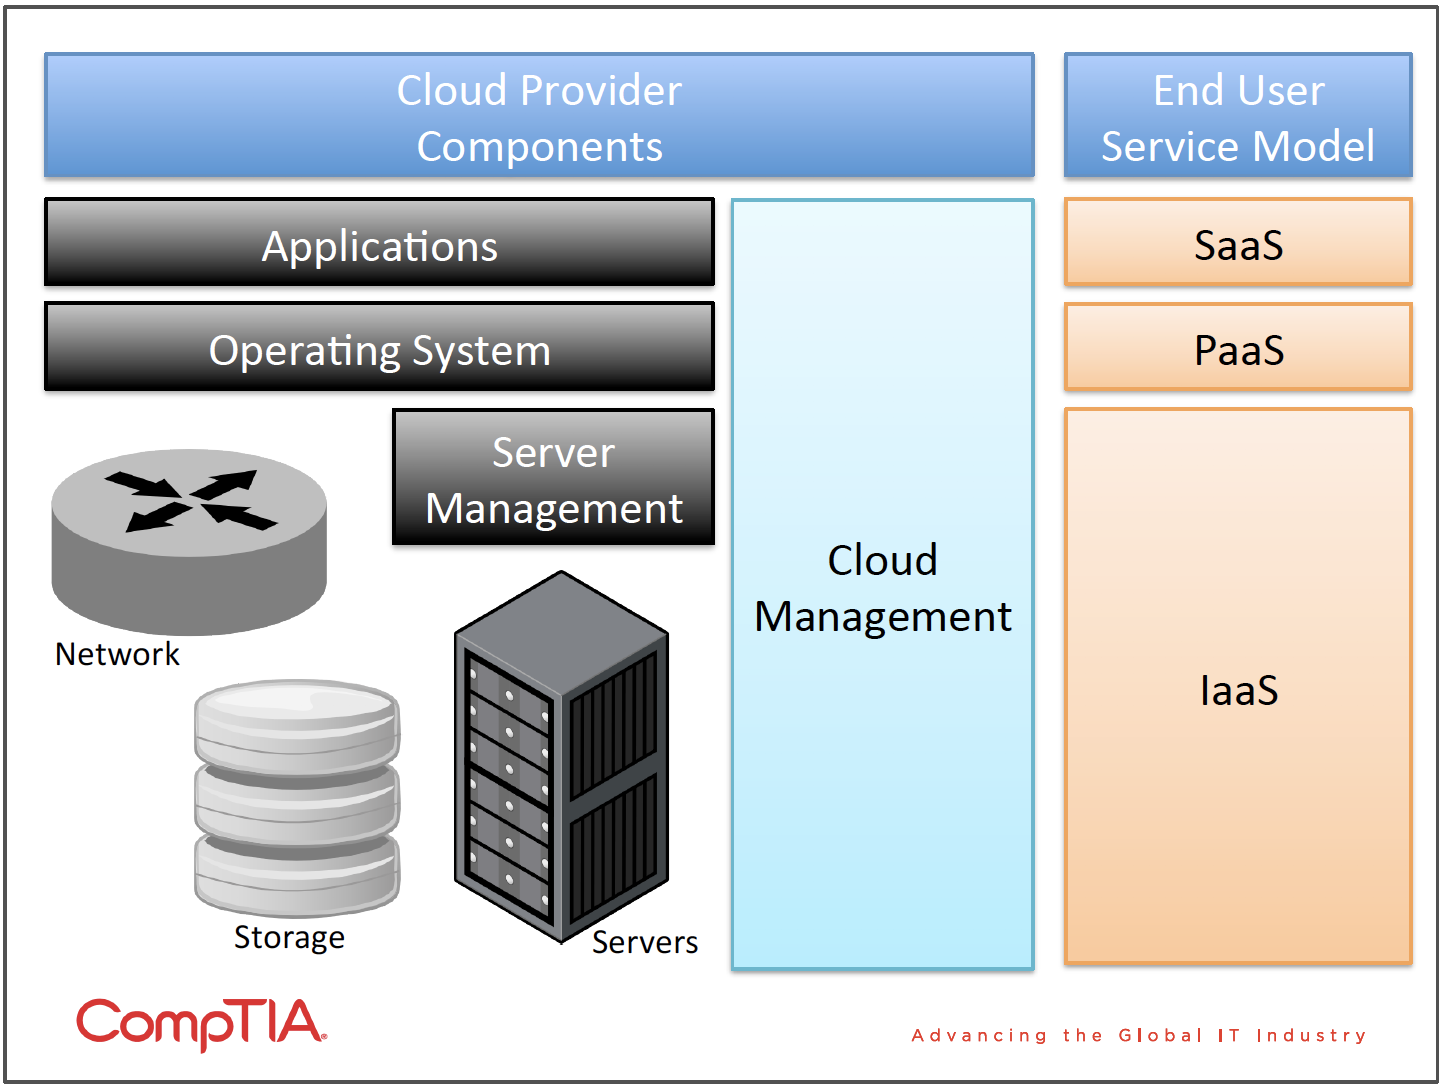 Graphic explaining components for cloud providers vs 